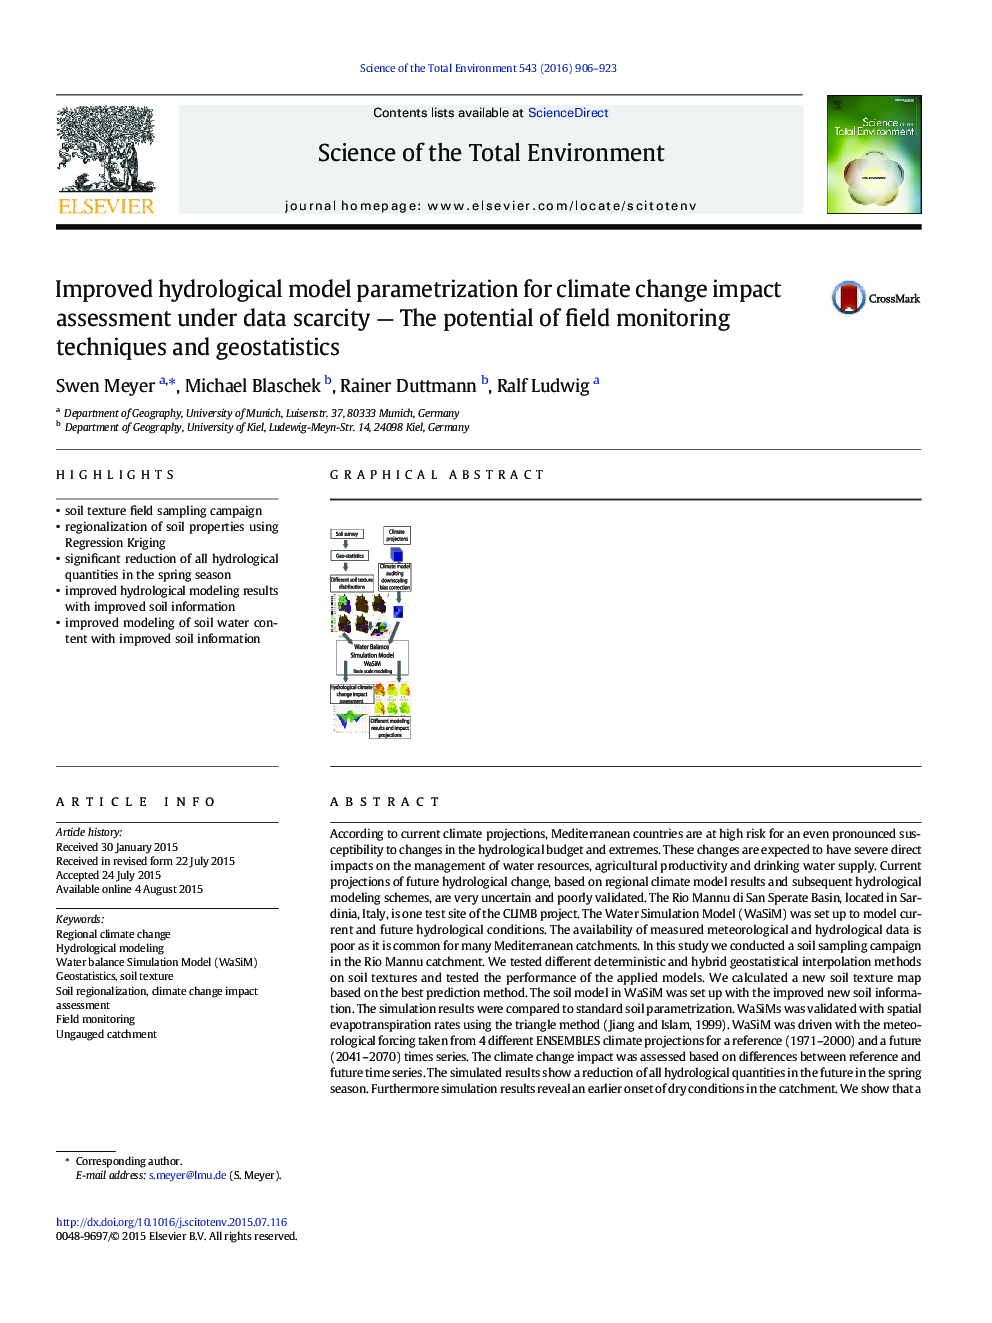 Improved hydrological model parametrization for climate change impact assessment under data scarcity — The potential of field monitoring techniques and geostatistics